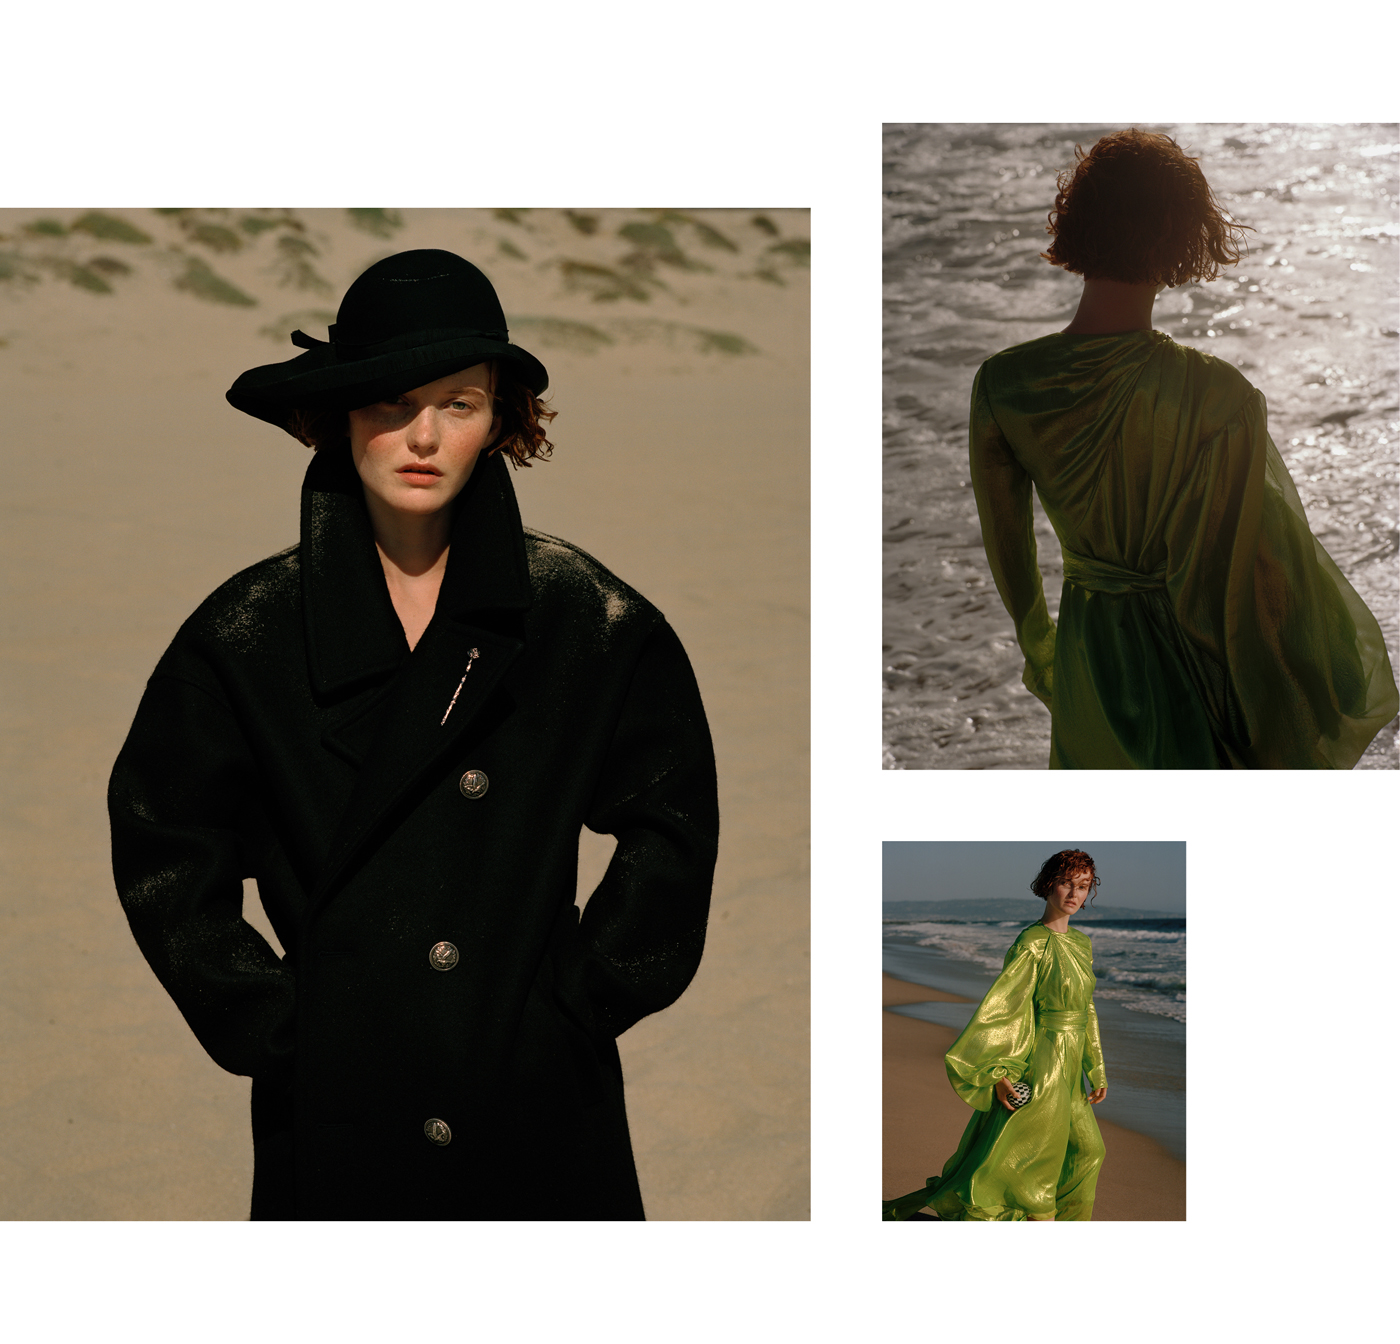 Left: Coat by Saint Laurent. Hat from Palace Costume.Right: Dress by Emilio Pucci.